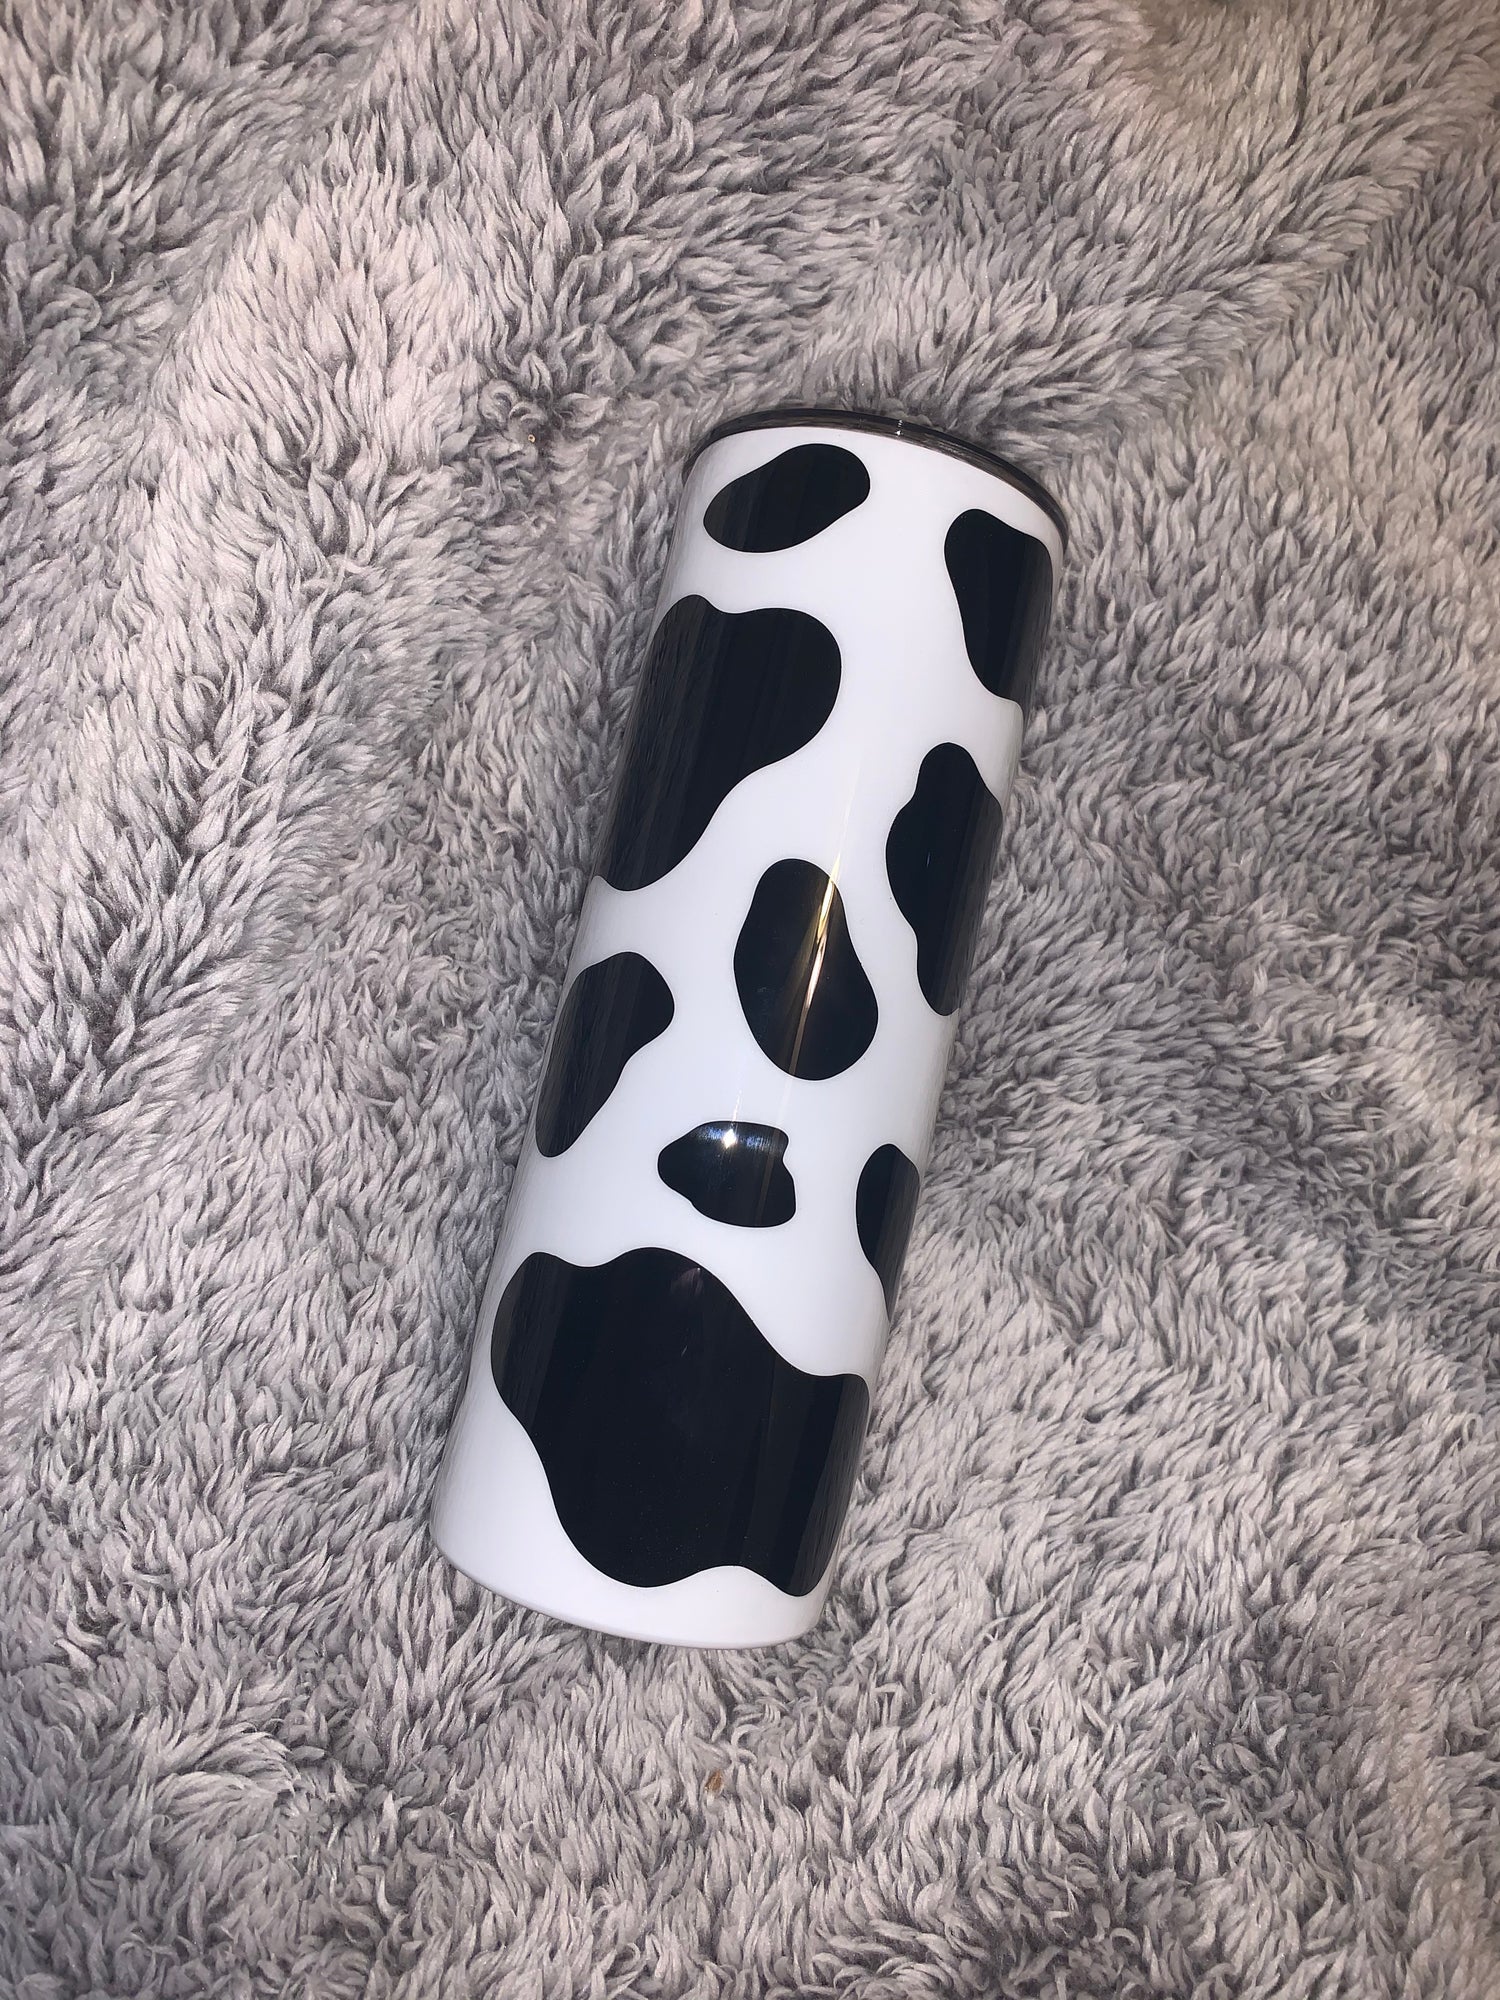 IchDich Cow Print Tumbler With Lid and Straw 20 oz Insulated Black Cow  Tumbler Stainless Steel Cow P…See more IchDich Cow Print Tumbler With Lid  and